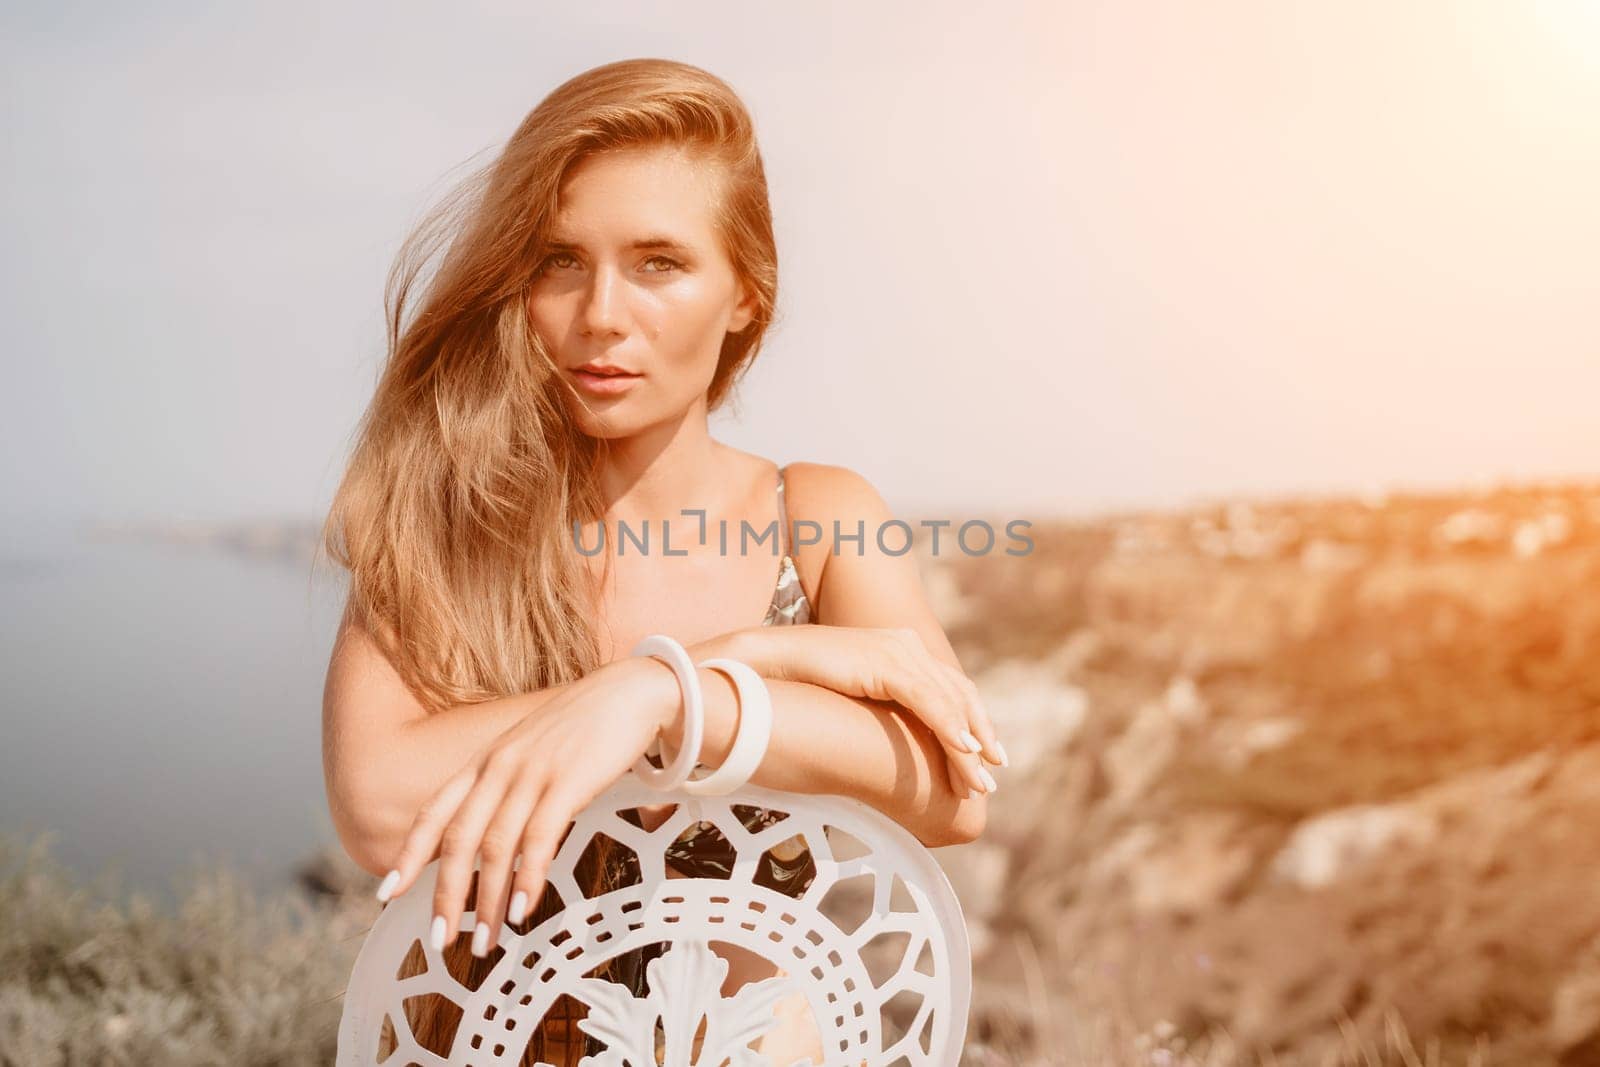 Happy boho woman portrait. Boho chic fashion style. Outdoor photo of free happy woman with long hair, sunny weather outdoors with sea mountains nature beautiful background. by panophotograph